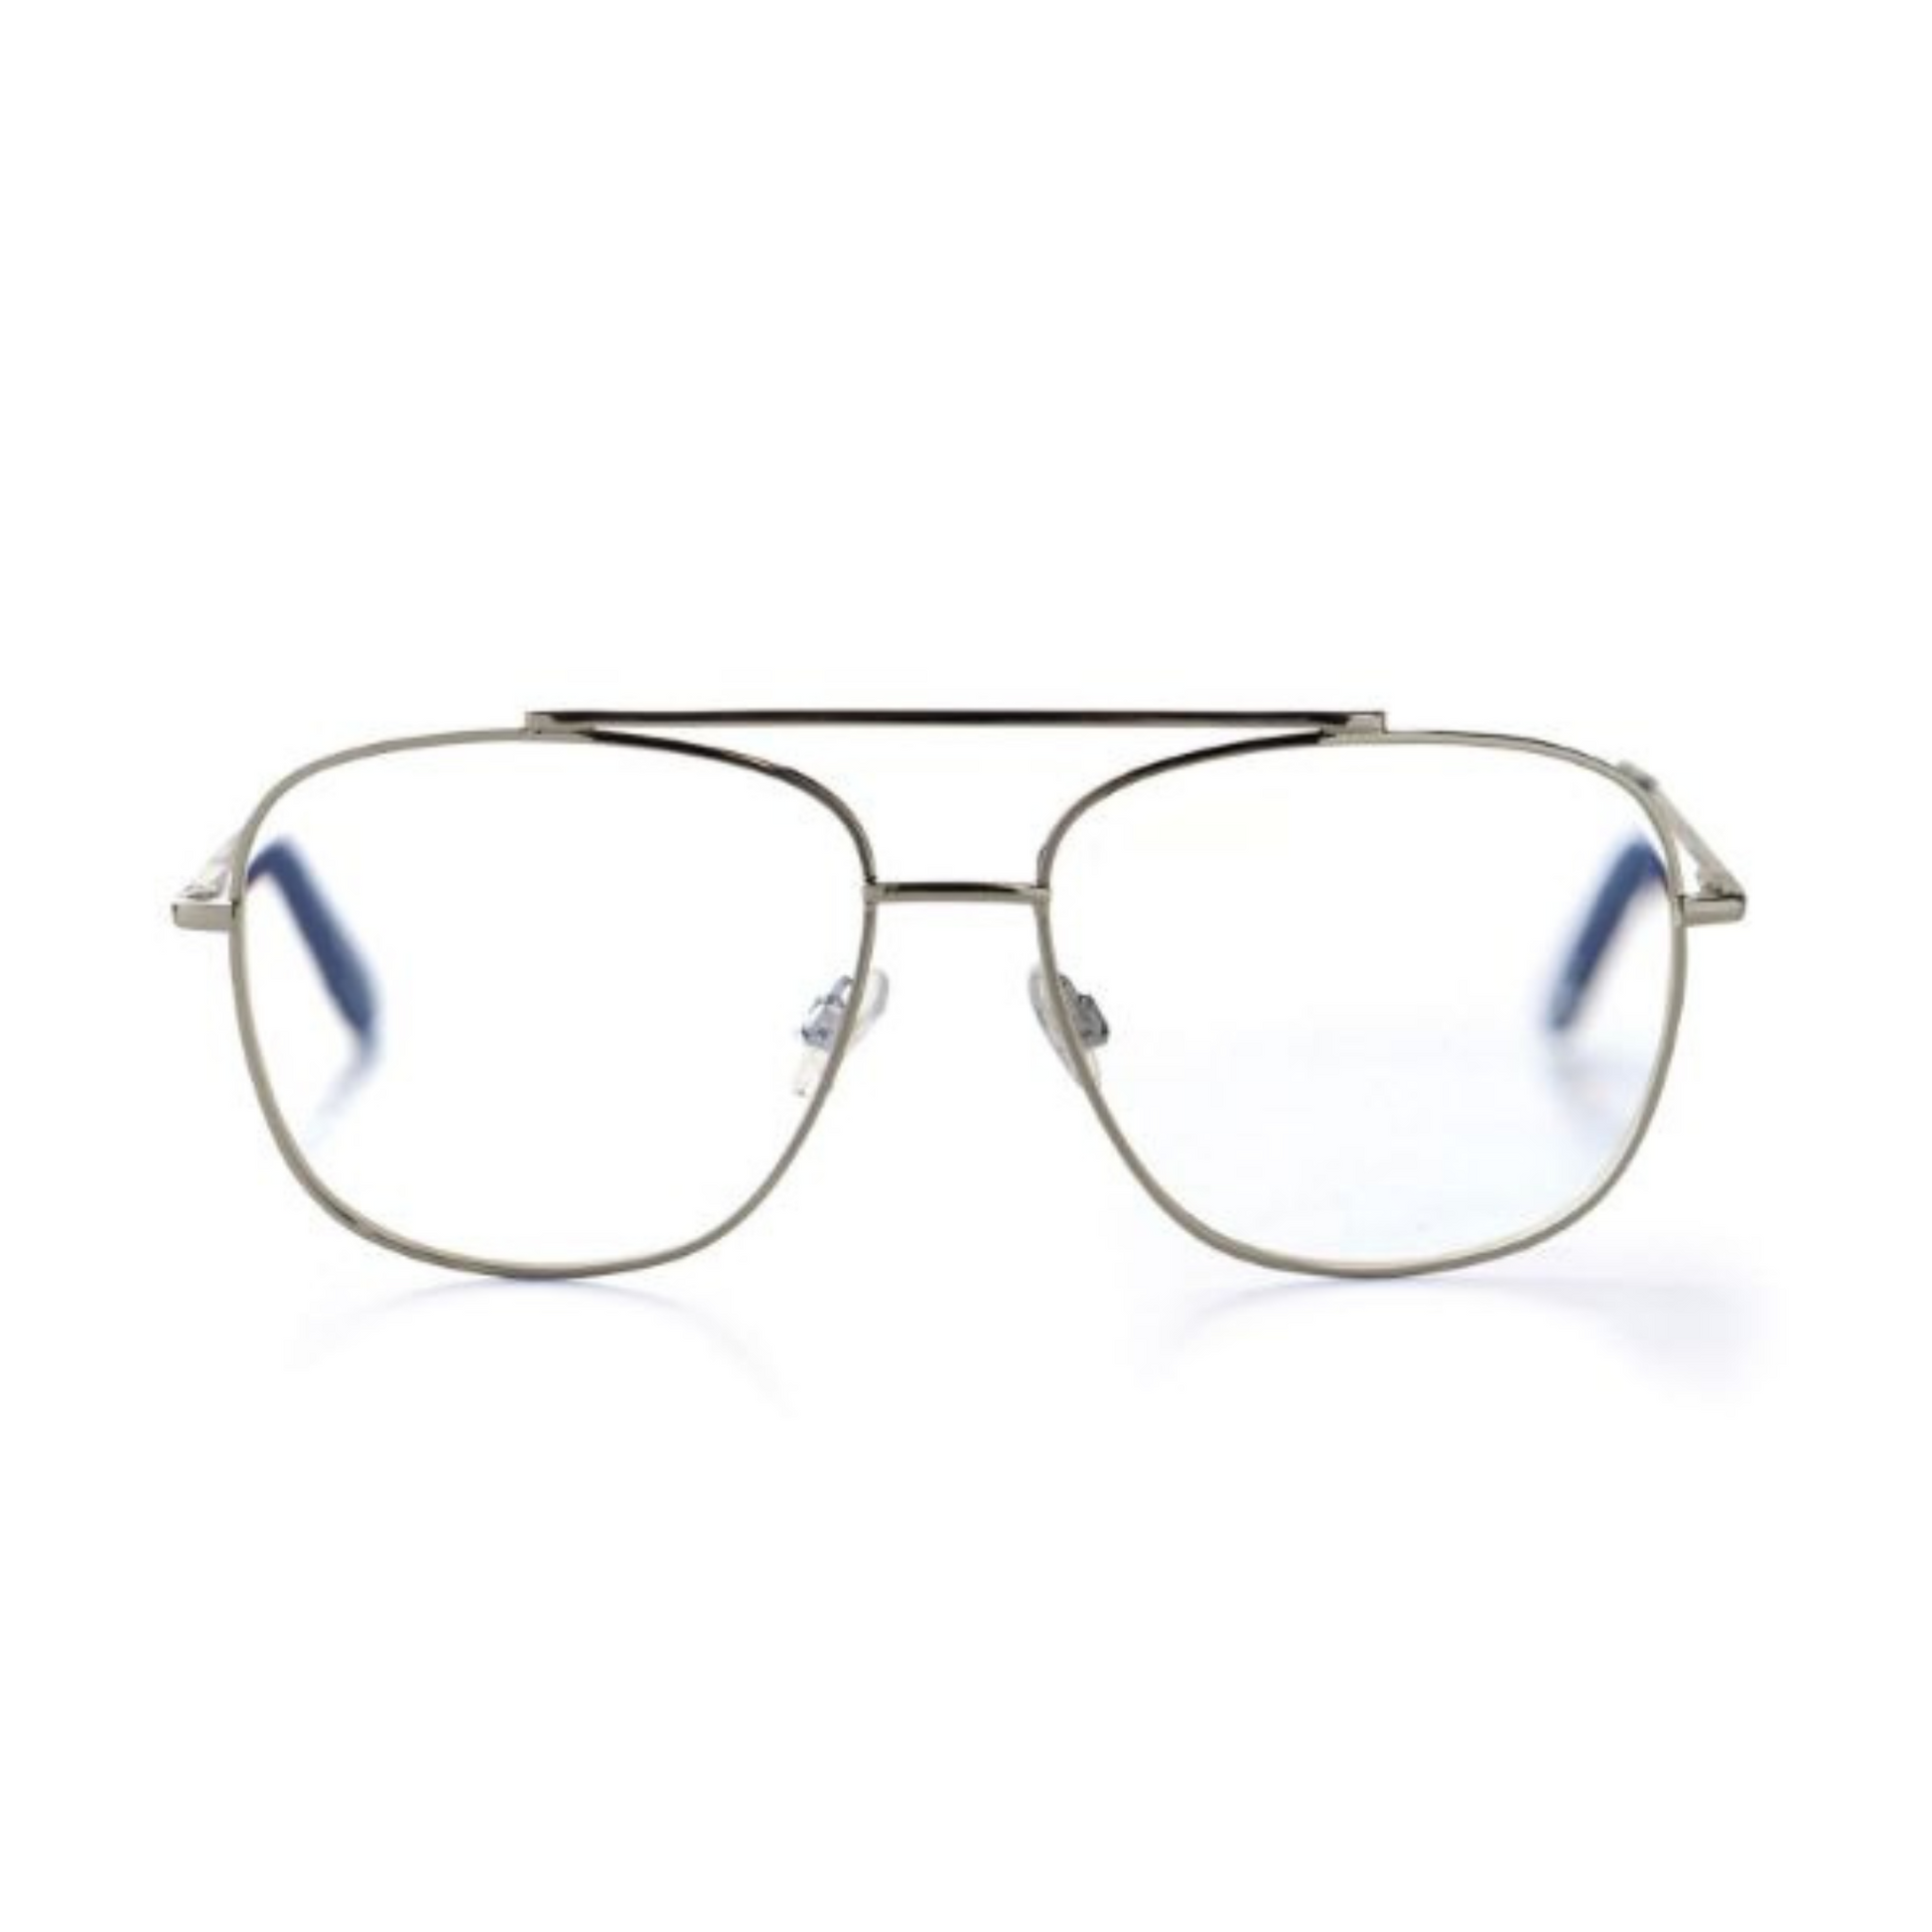 thin silver rimmed reading glasses with silver bar accent. This style is called Avery